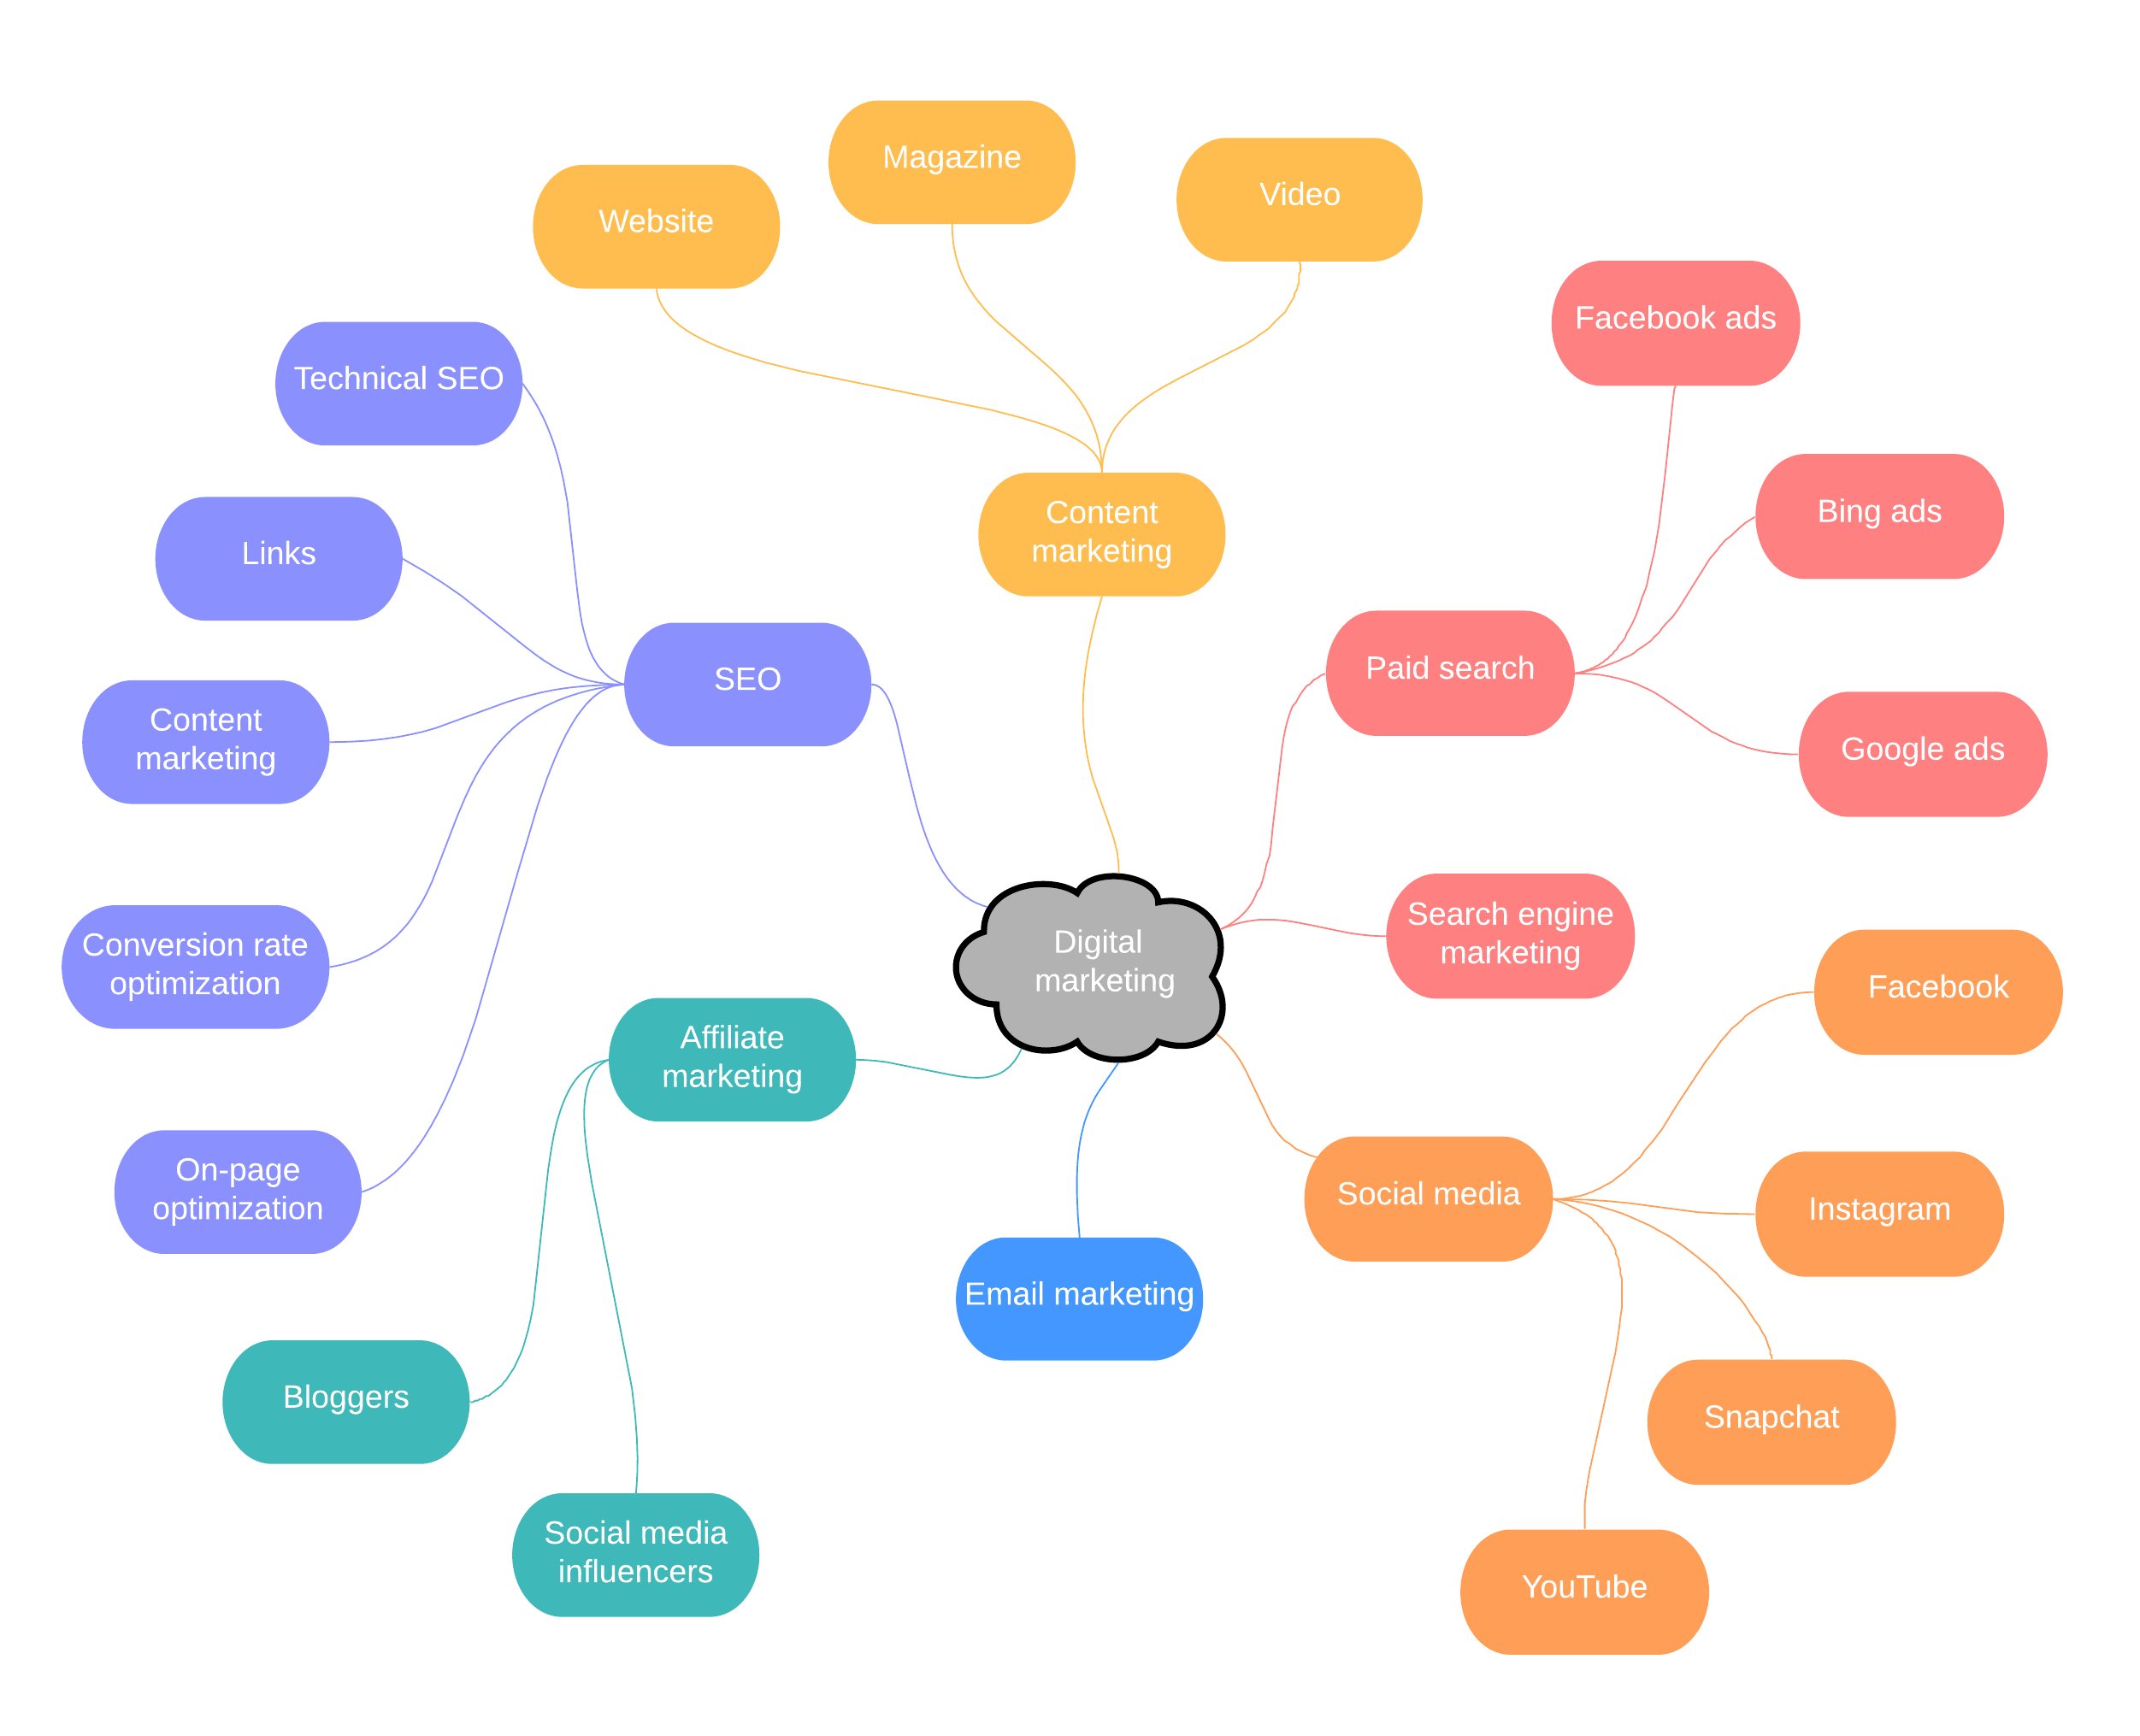 example mind map